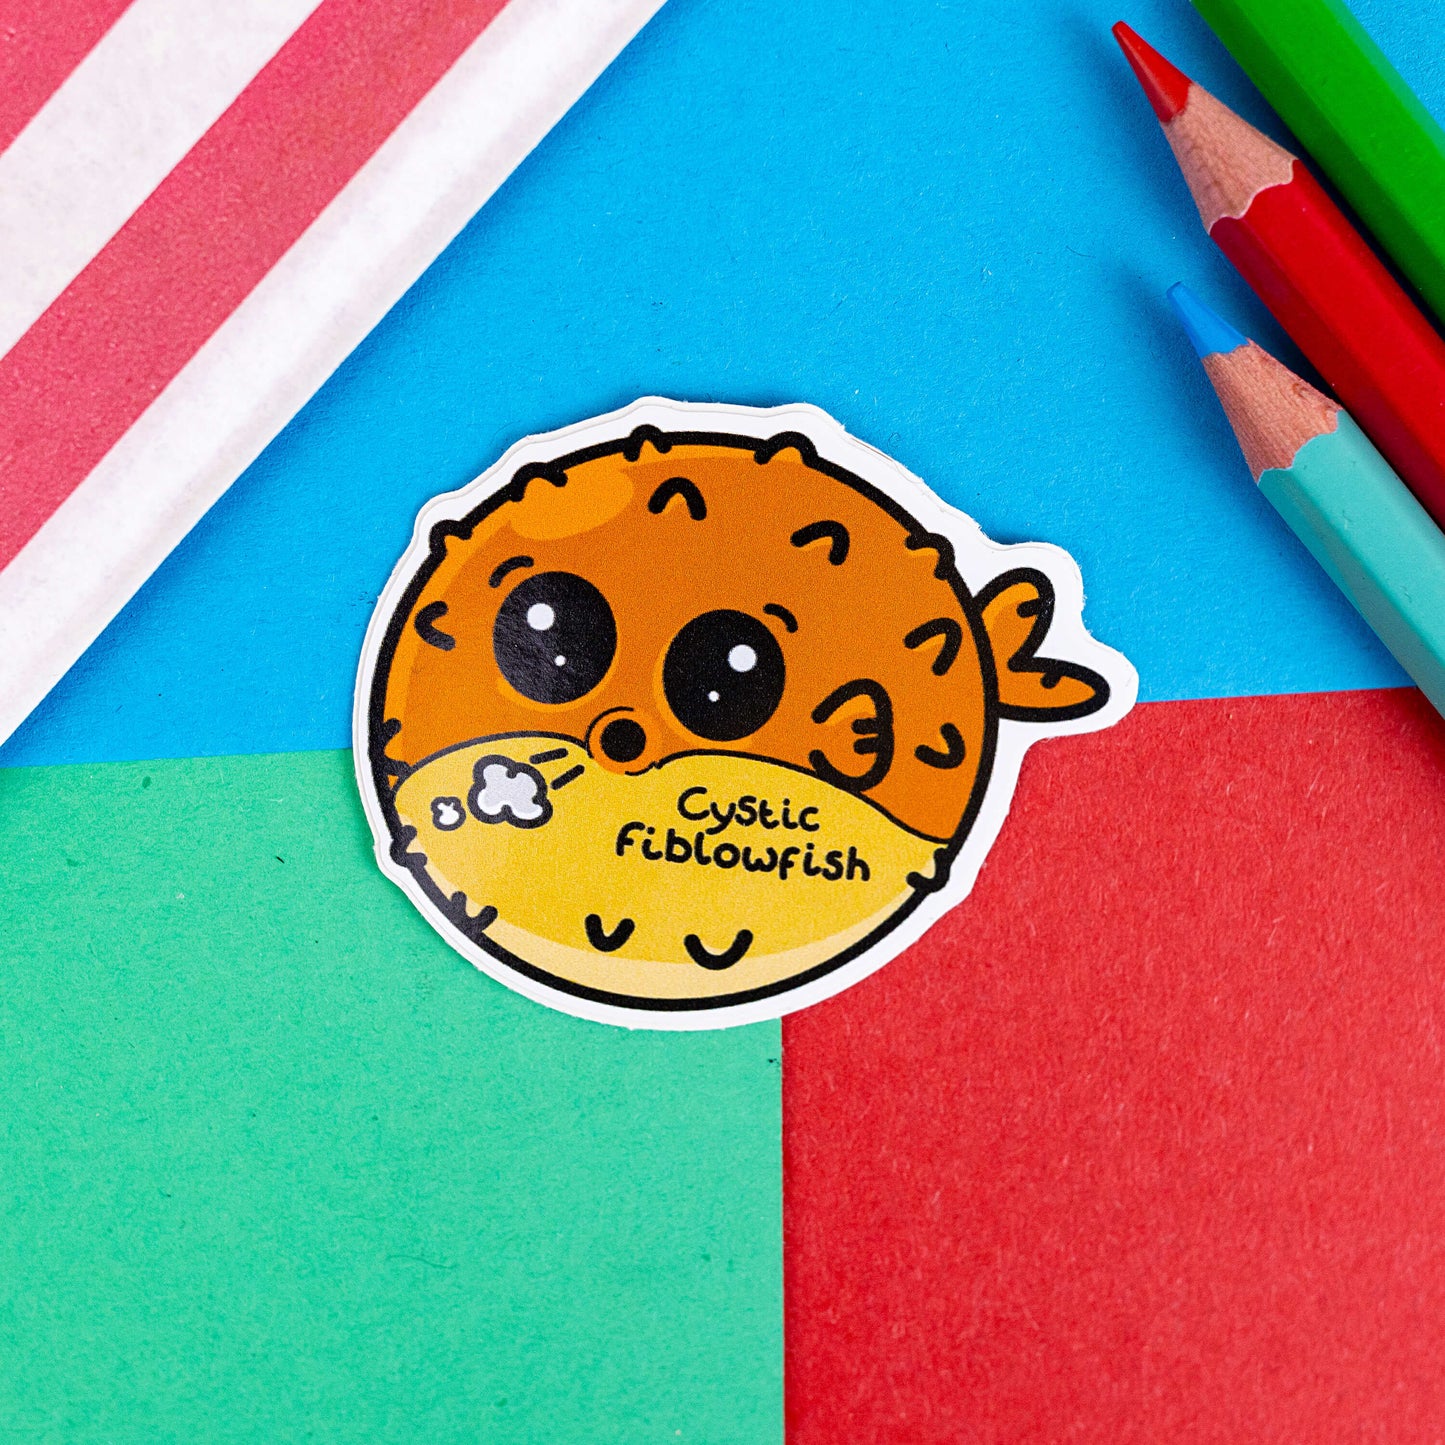 The Cystic Fiblowfish Sticker - Cystic Fibrosis on a red, blue and green background with colouring pencils and red stripe candy bag. The pufferfish shape sticker is wheezing with clouds coming out its mouth and black text across its belly reading 'cystic fiblowfish'. The design is raising awareness for cystic fibrosis.